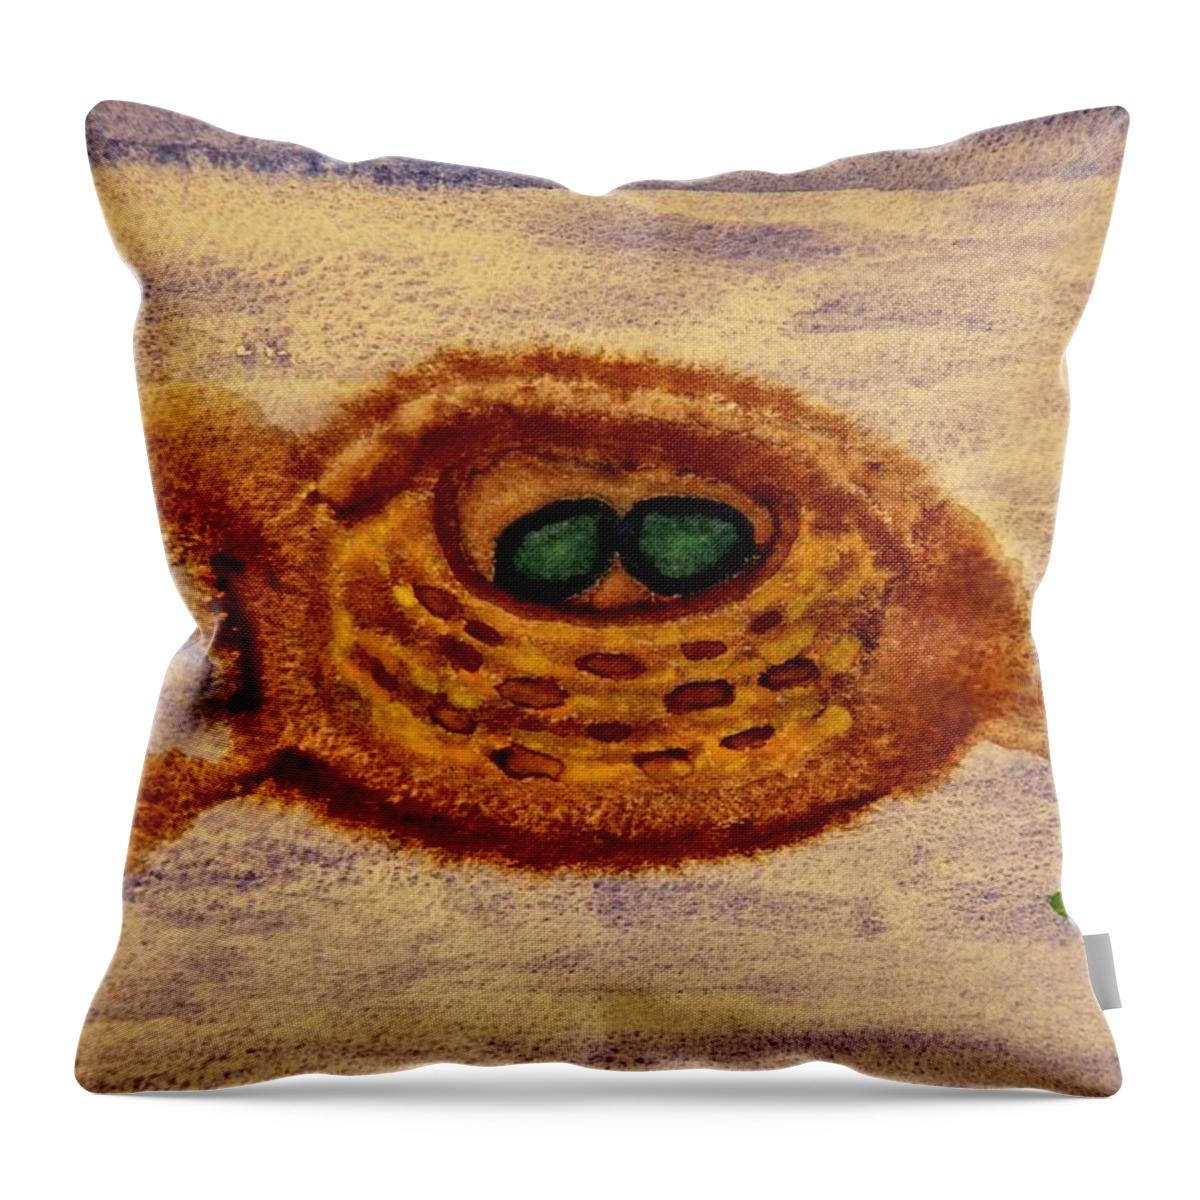 Nest Throw Pillow featuring the painting Nesting Comfort by Karen Nice-Webb